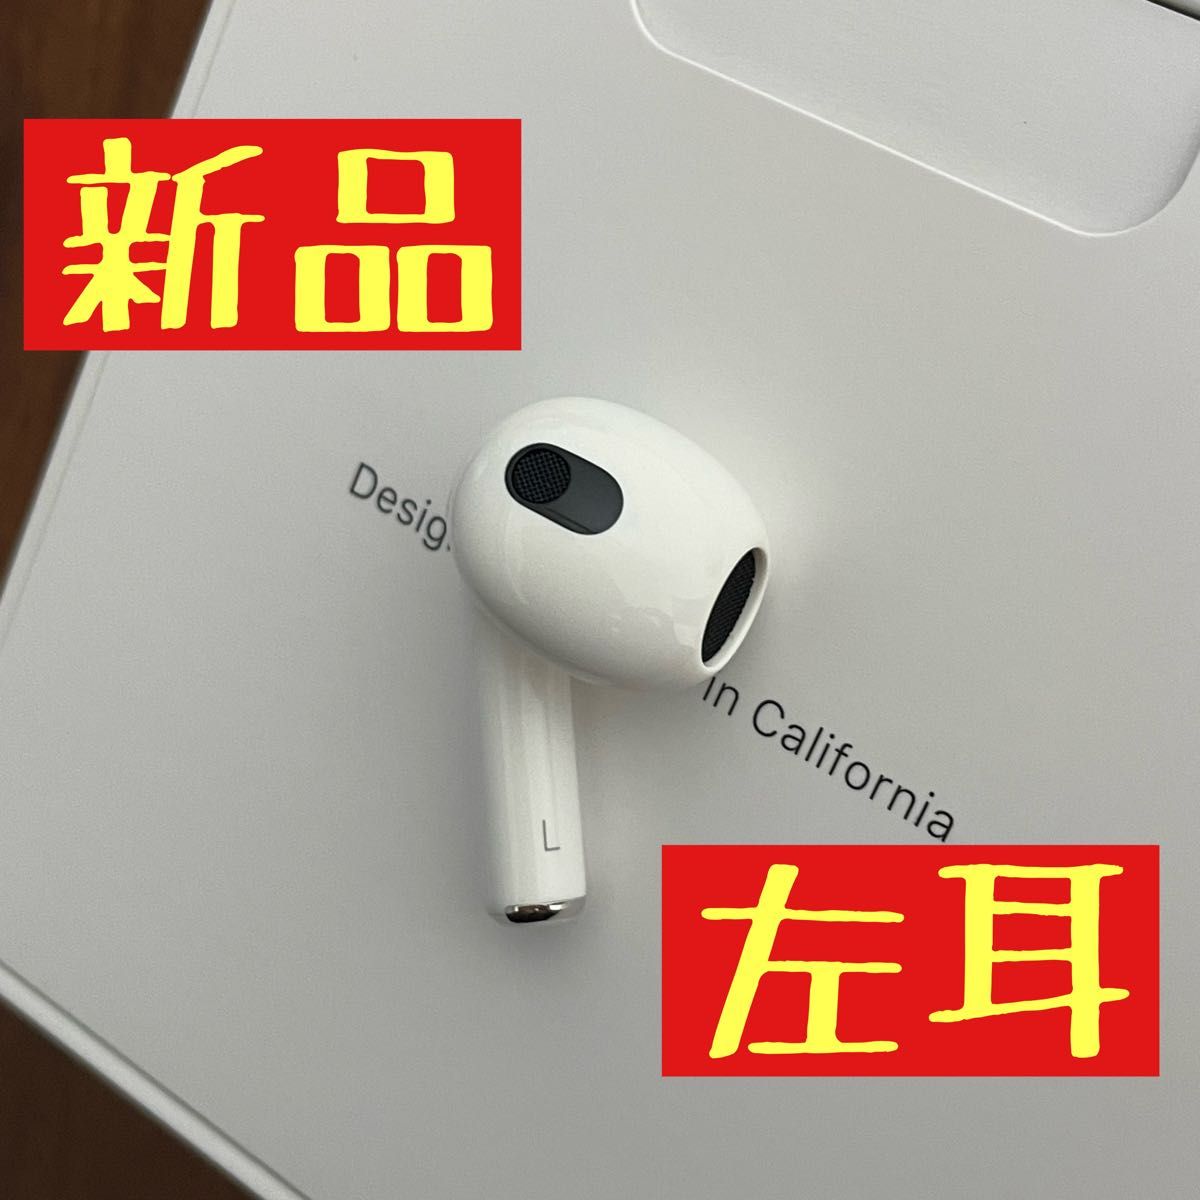 Apple AirPods AirPods第３世代 右耳のみ R片耳 国内純正品